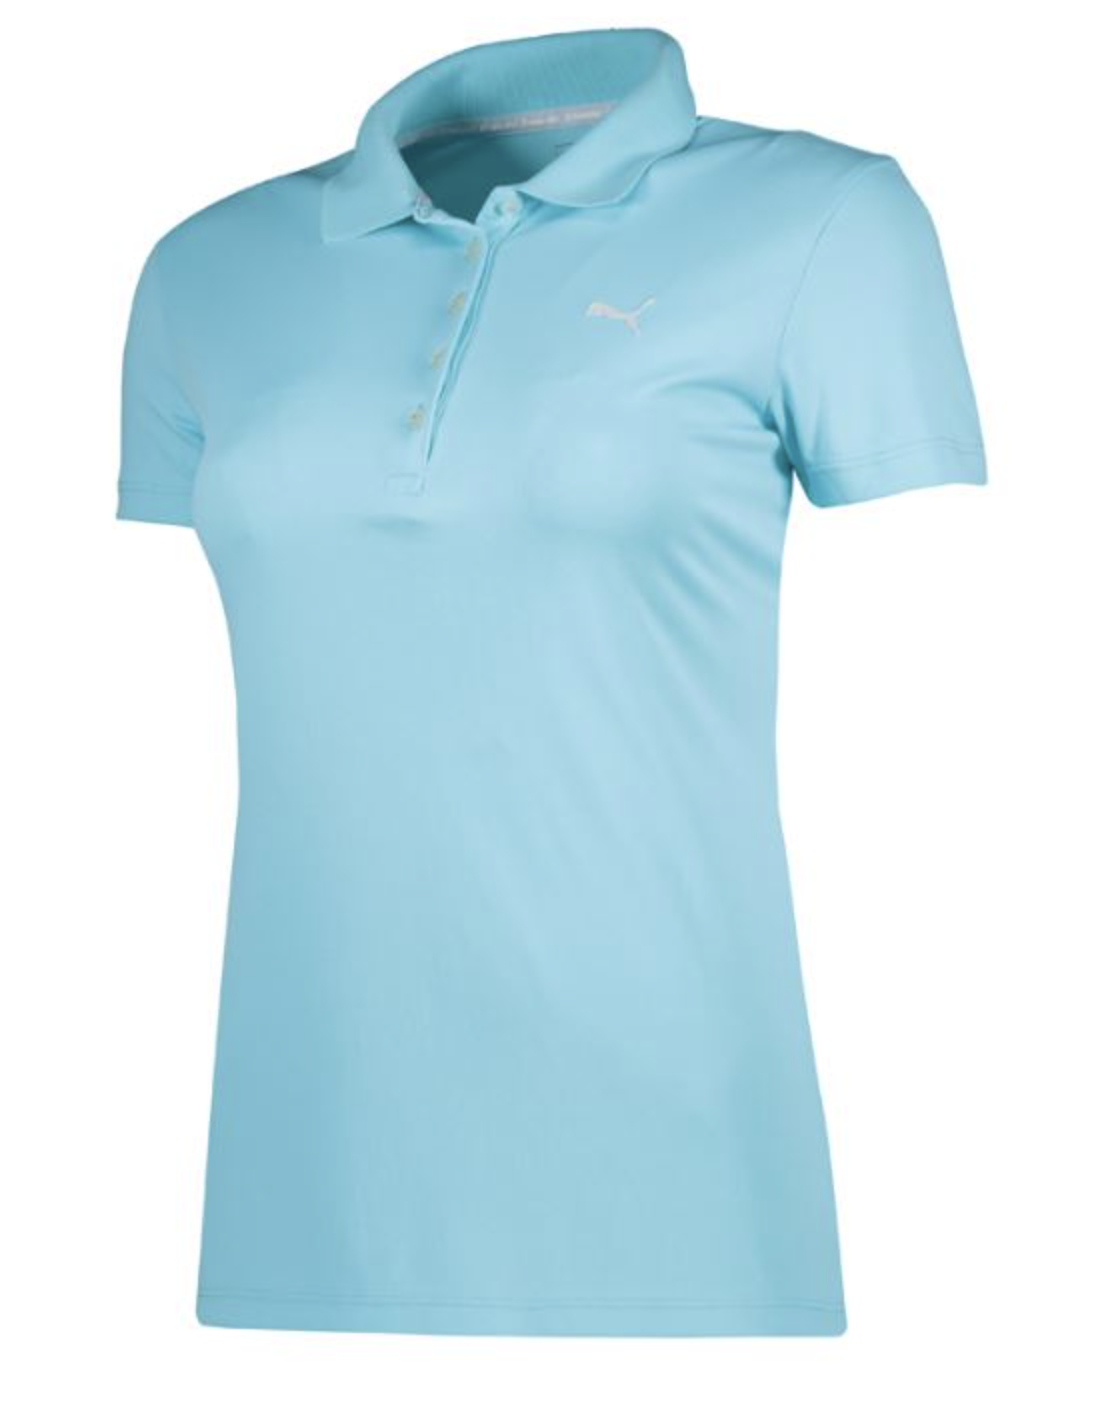 50% off on PUMA Golf Ladies Pounce Polo | OneDayOnly